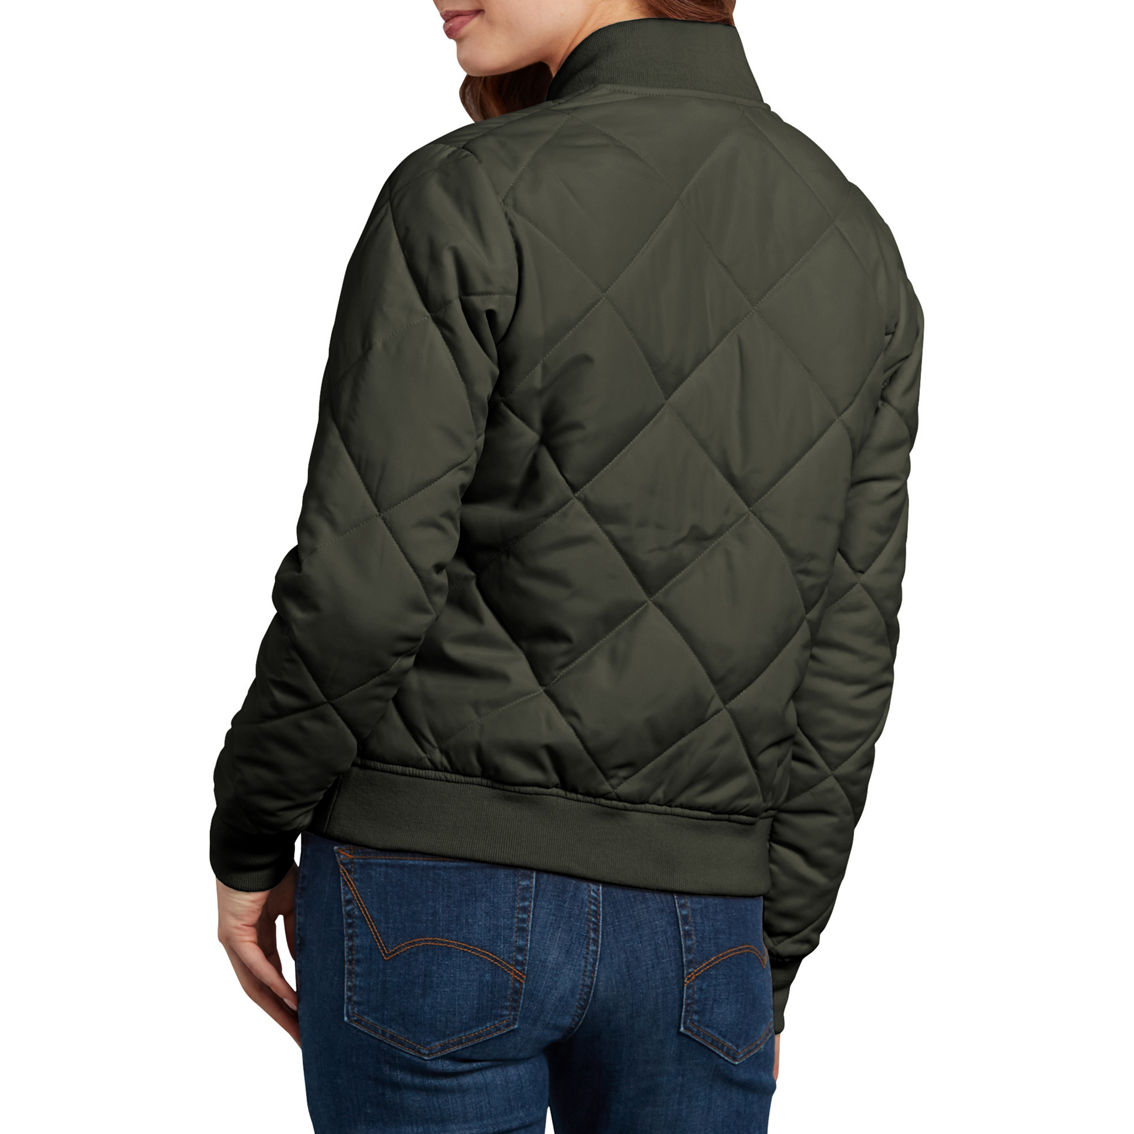 Dickies Quilted Bomber Jacket - Image 2 of 2